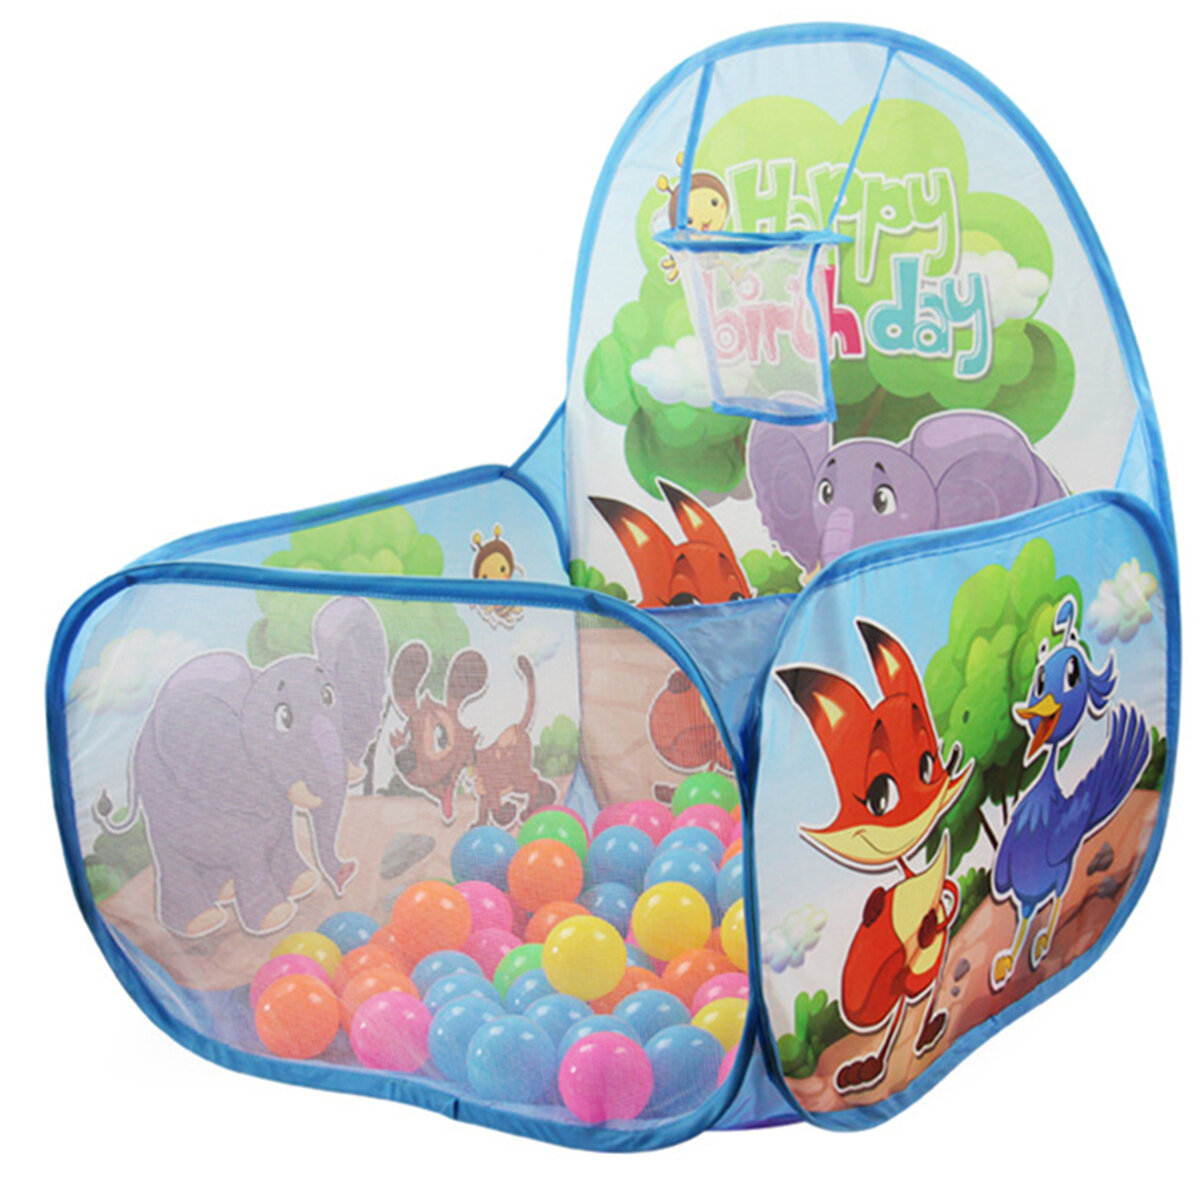 

60CM Baby Toys Tent Ocean Plastic Ball Pool Camping Indoor Basketball Basket Play Tent